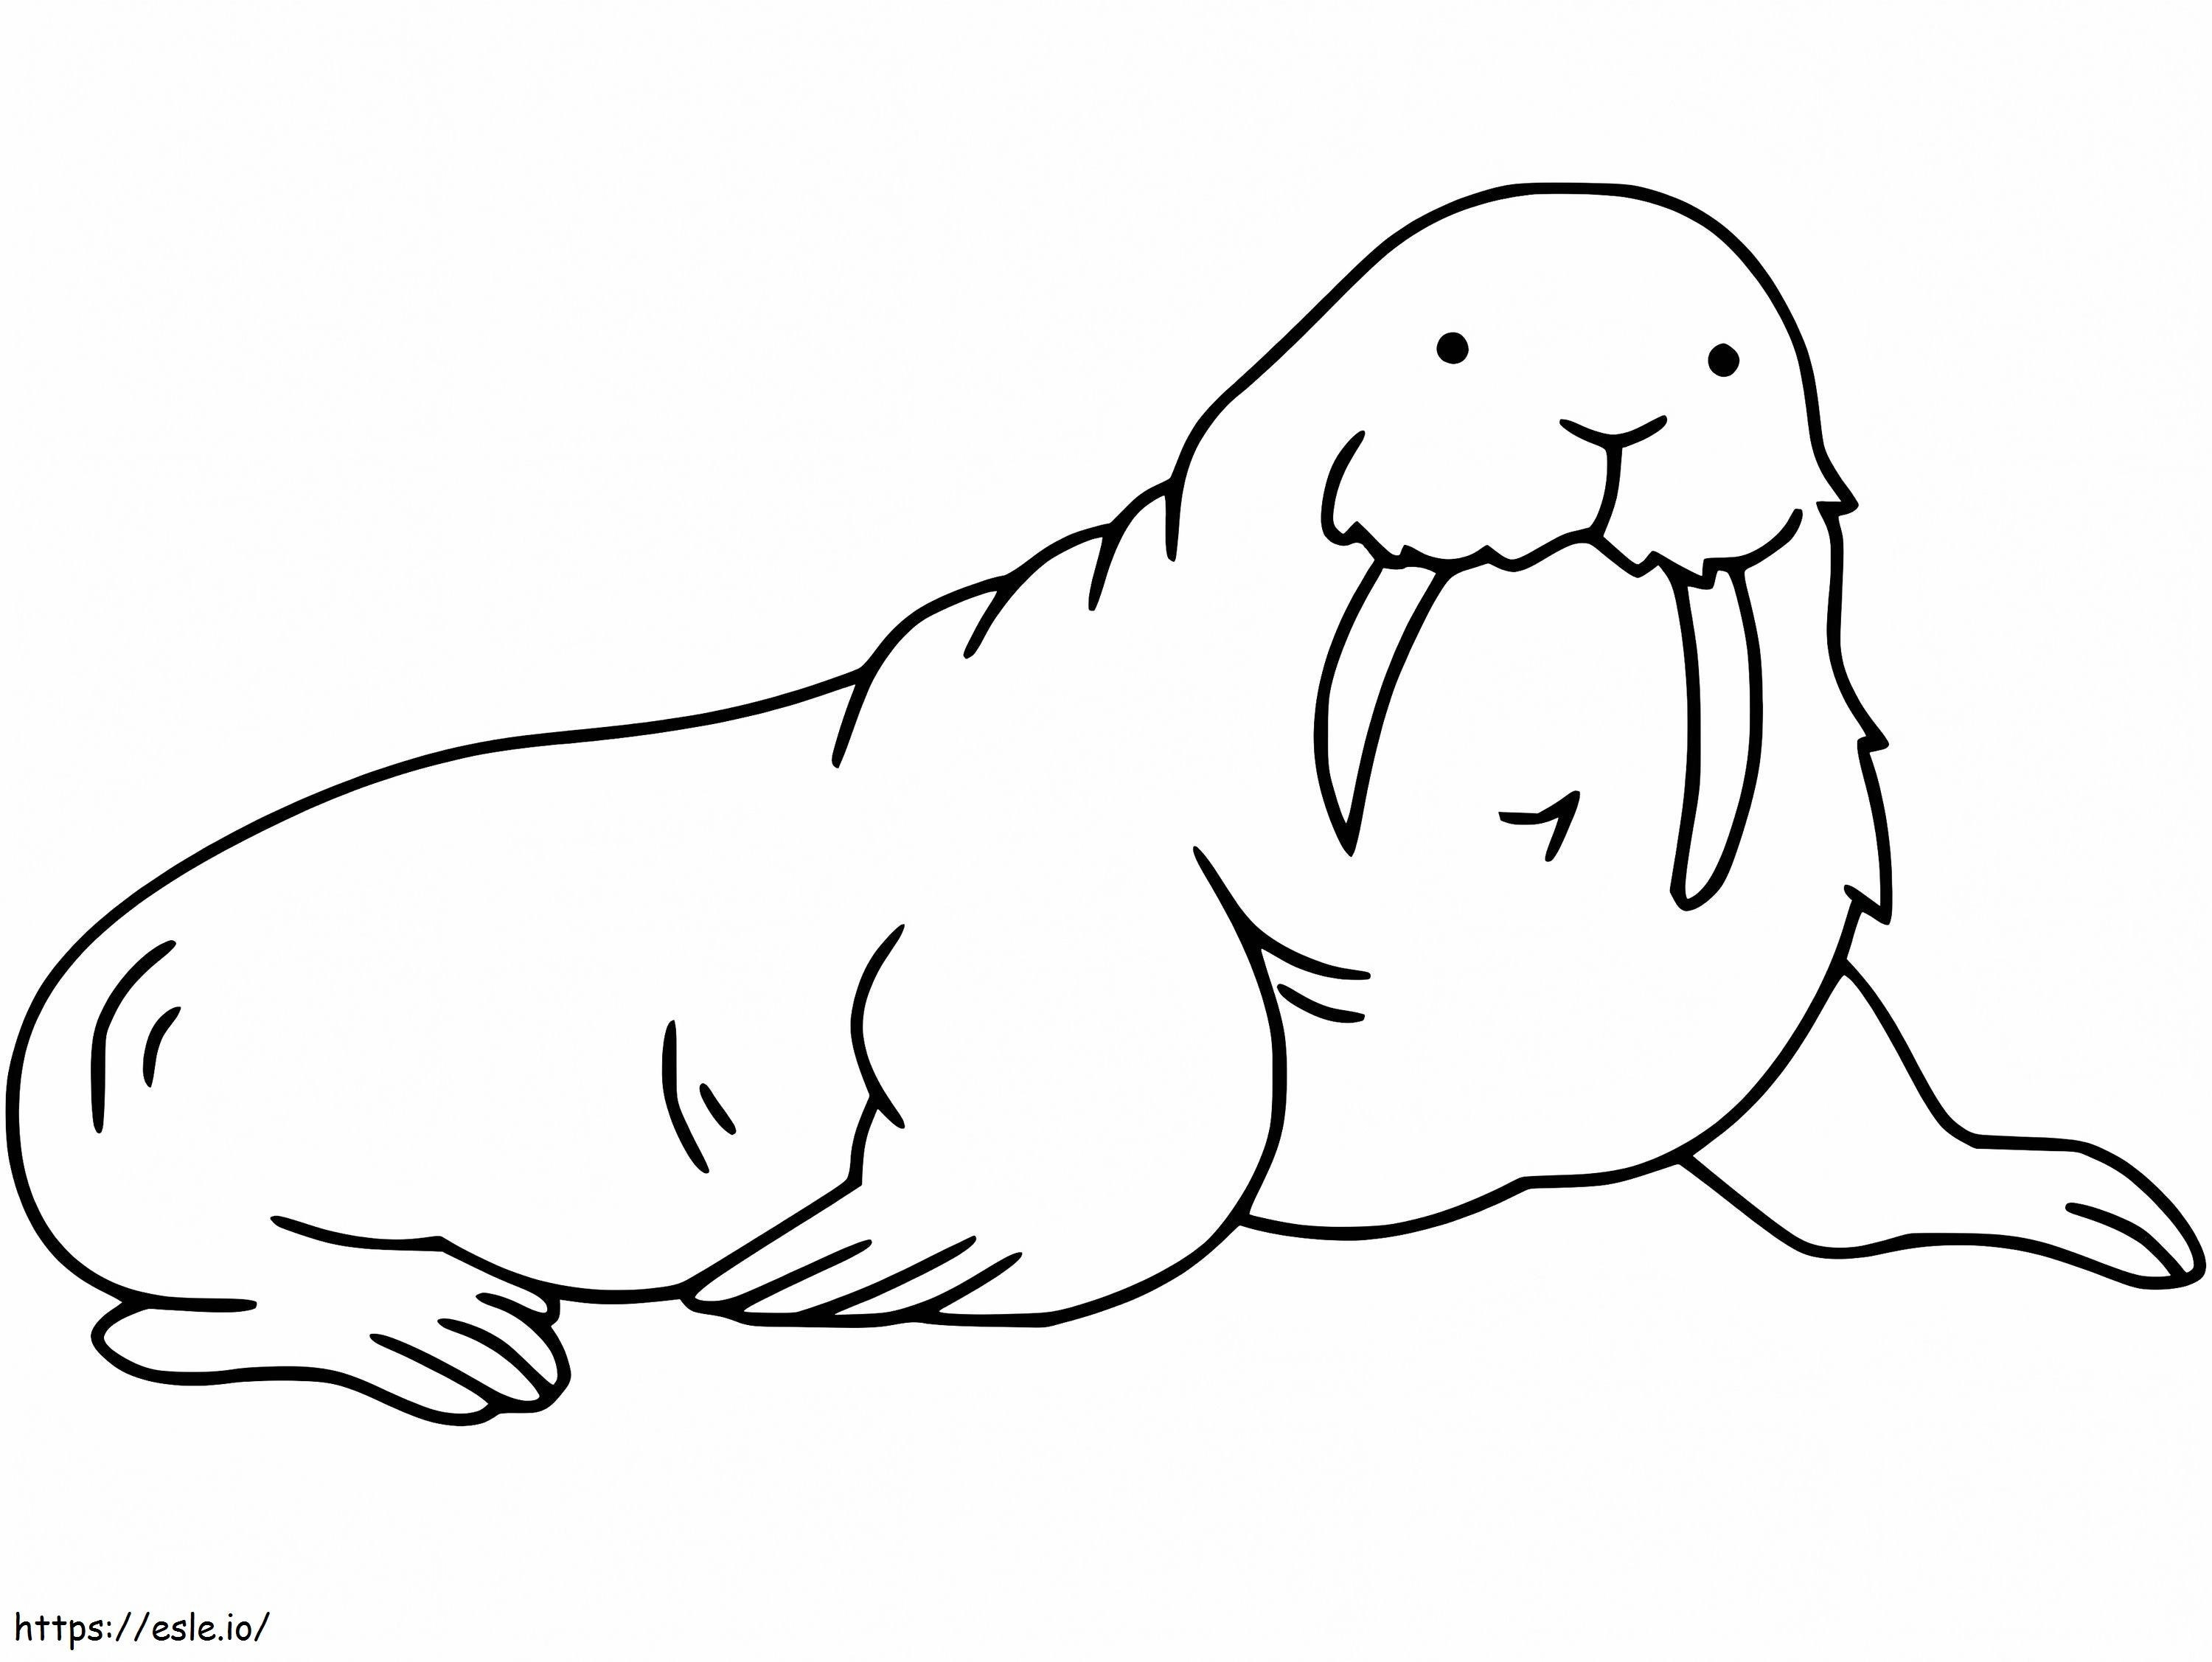 Walrus 5 coloring page